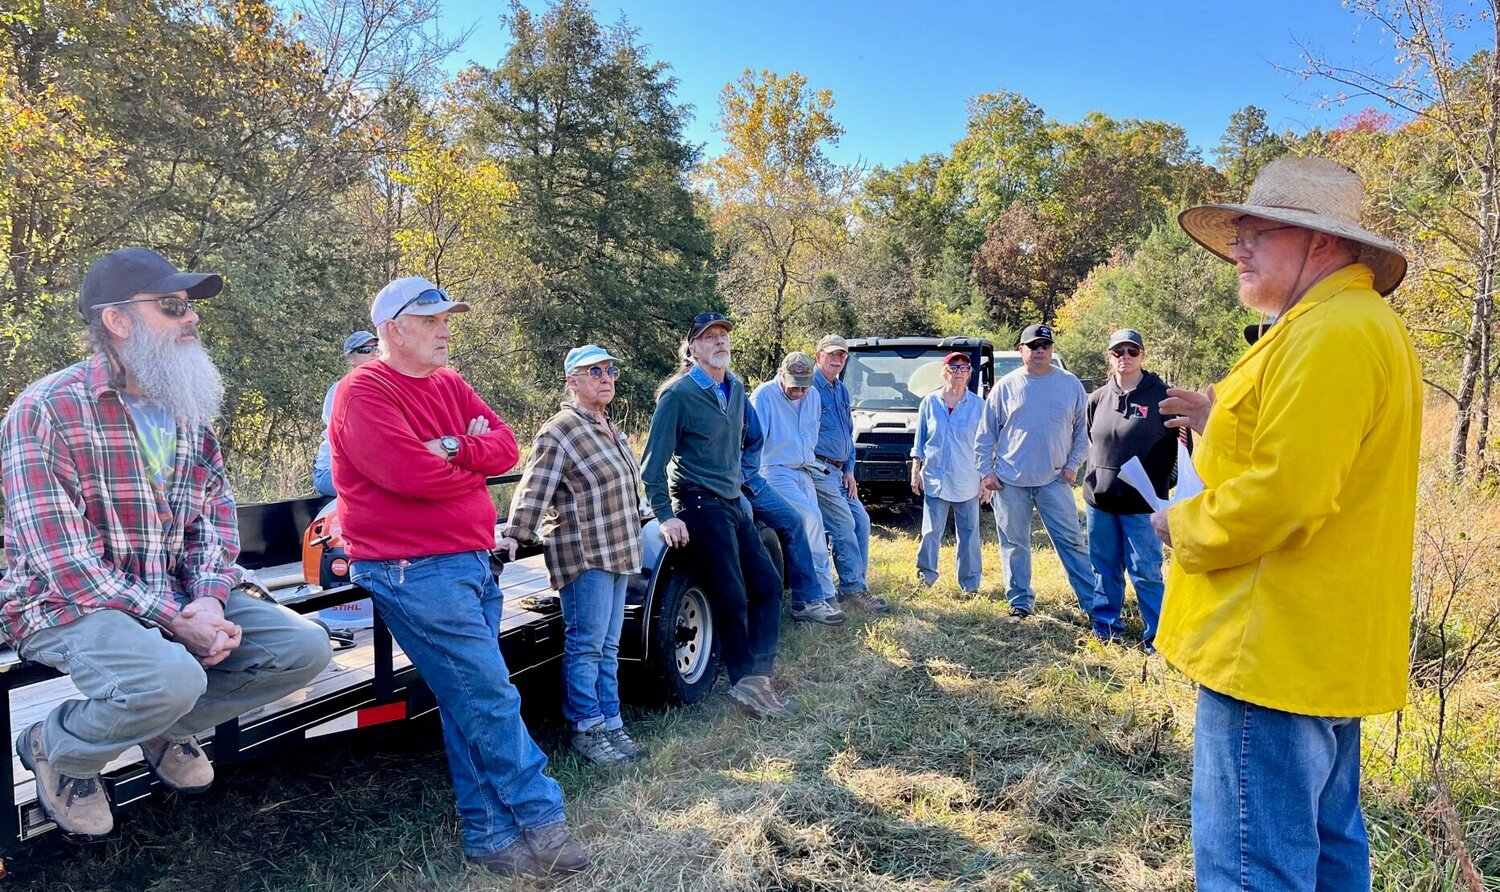 Prescribed fire workshop participants listen while Missouri Department of Conservation Private Land Conservationist Mark McLain, far right, explains how to use drip torches and leaf blowers during controlled fires.